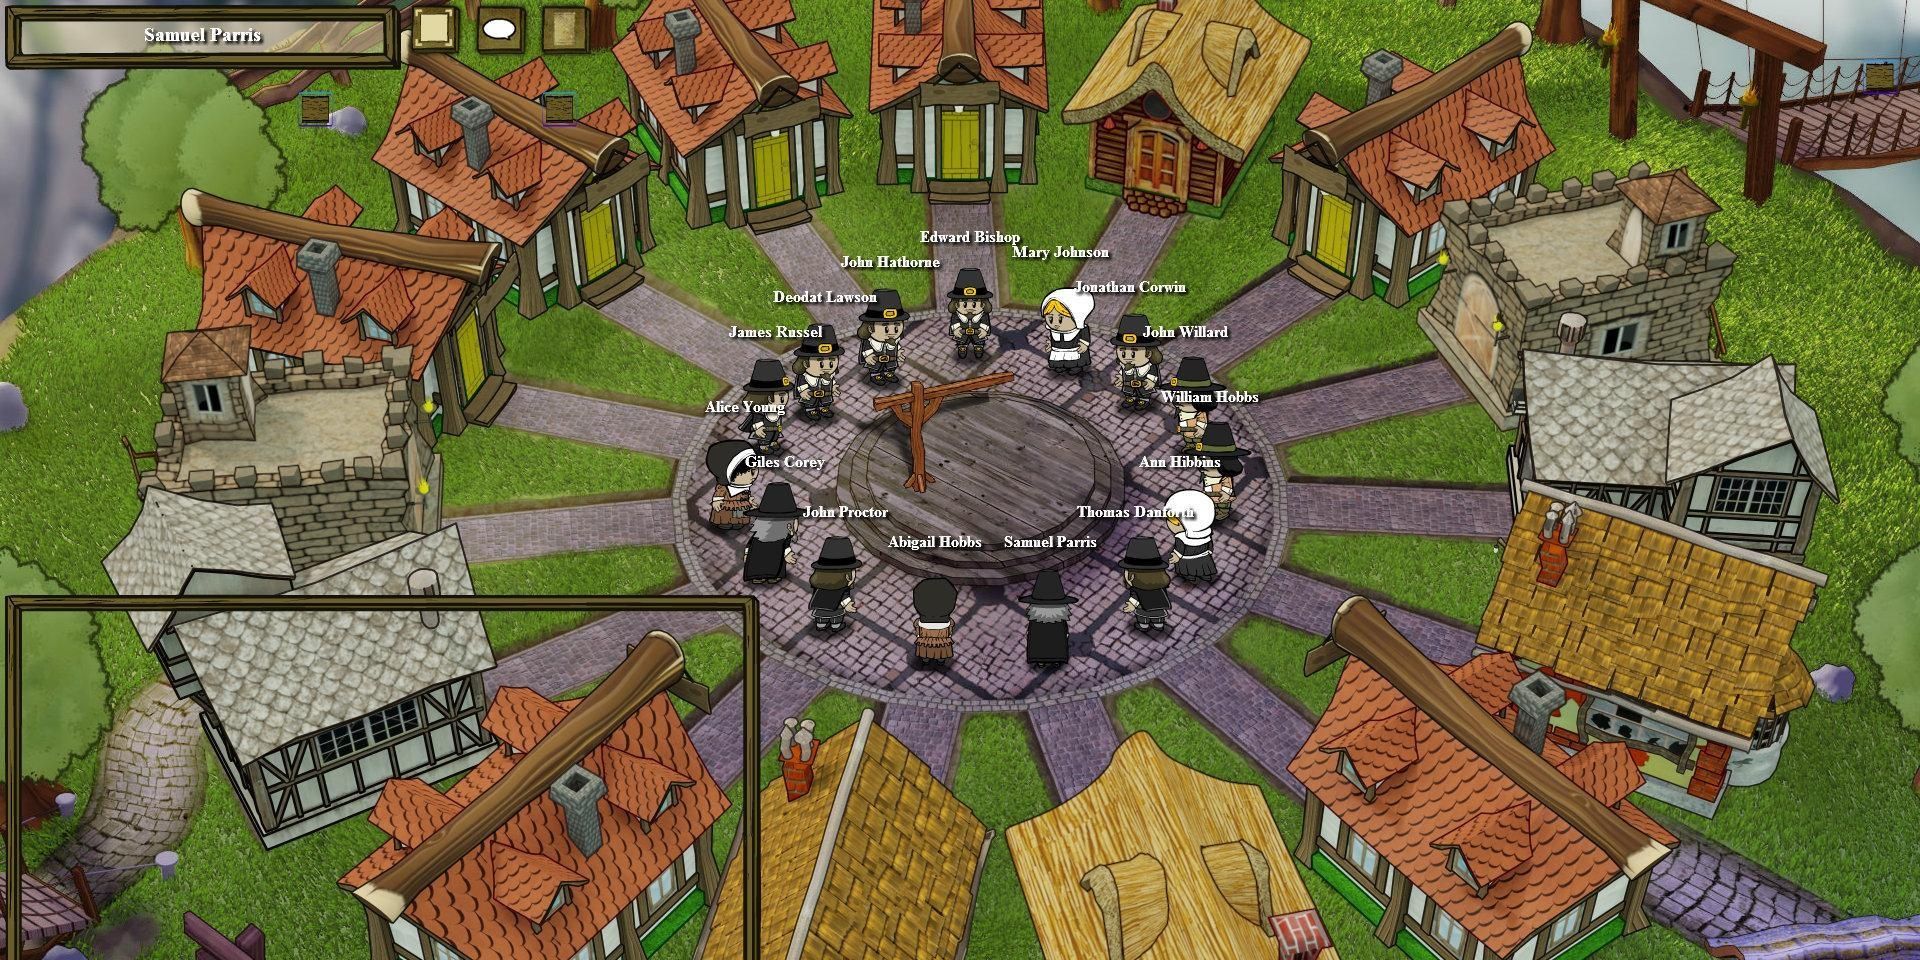 A screenshot showing gameplay in Town of Salem